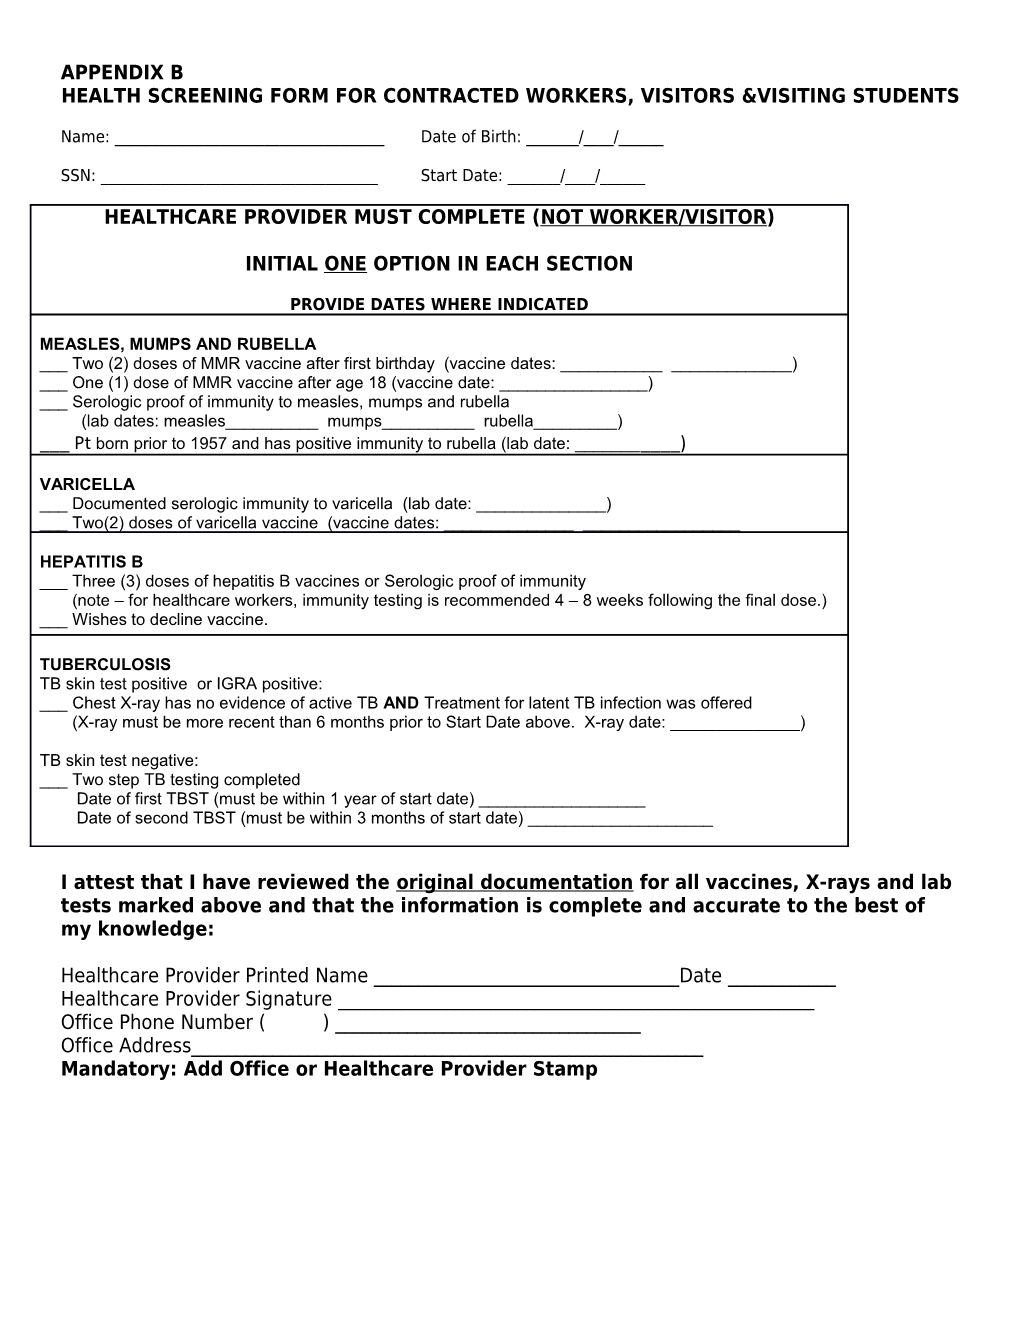 Health Screening Form for Contracted Workers, Visitors &Visiting Students